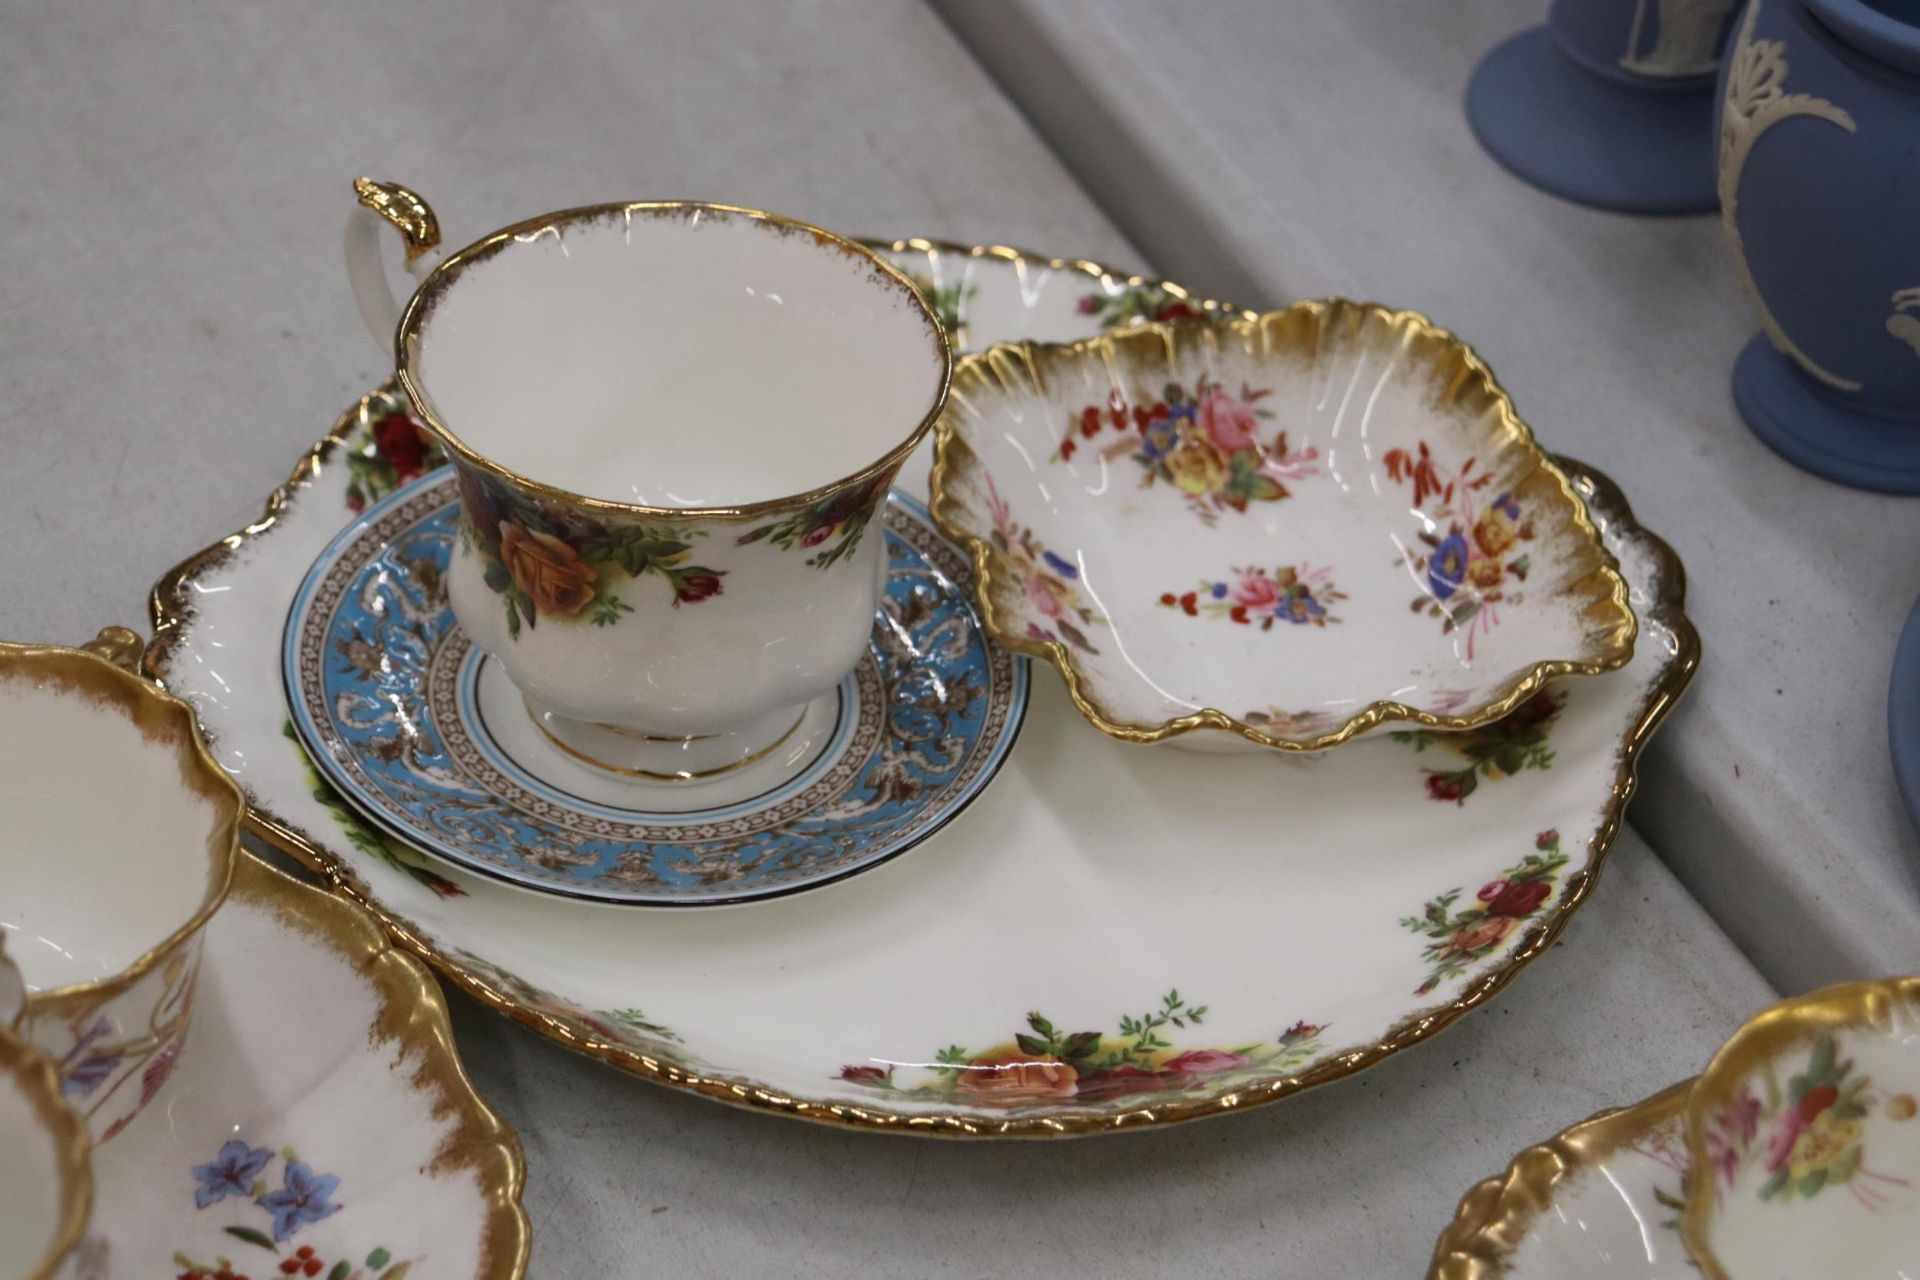 A 15 PIECE PART TEASET HAMMERSLEY AND CO TOGETHER WITH AN OLD ROYAL ALBERT COUNTRY ROSES CAKE PLATES - Image 7 of 10